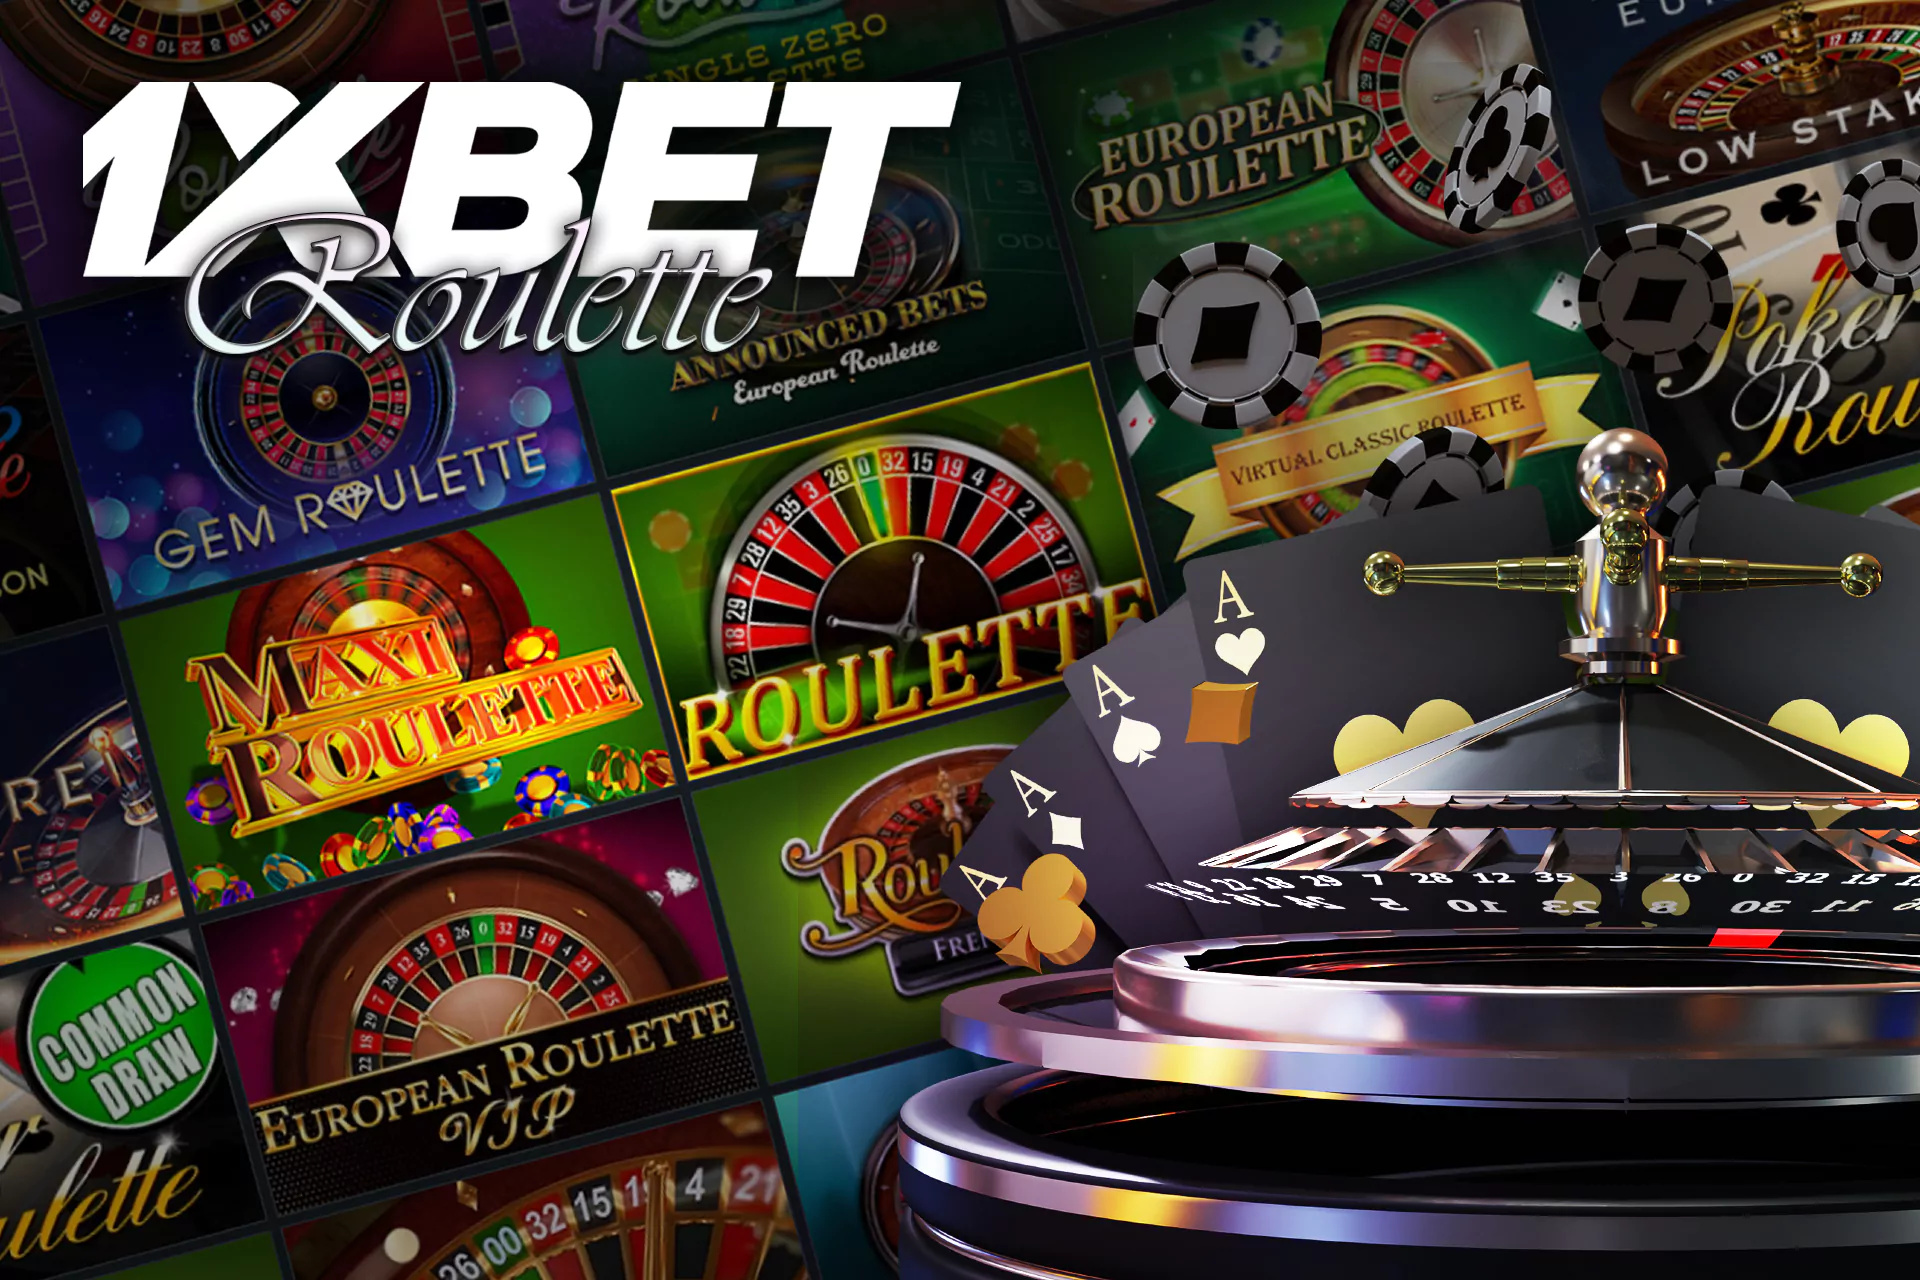 If you like playing classic roulette, you must try an online one at 1xBet.